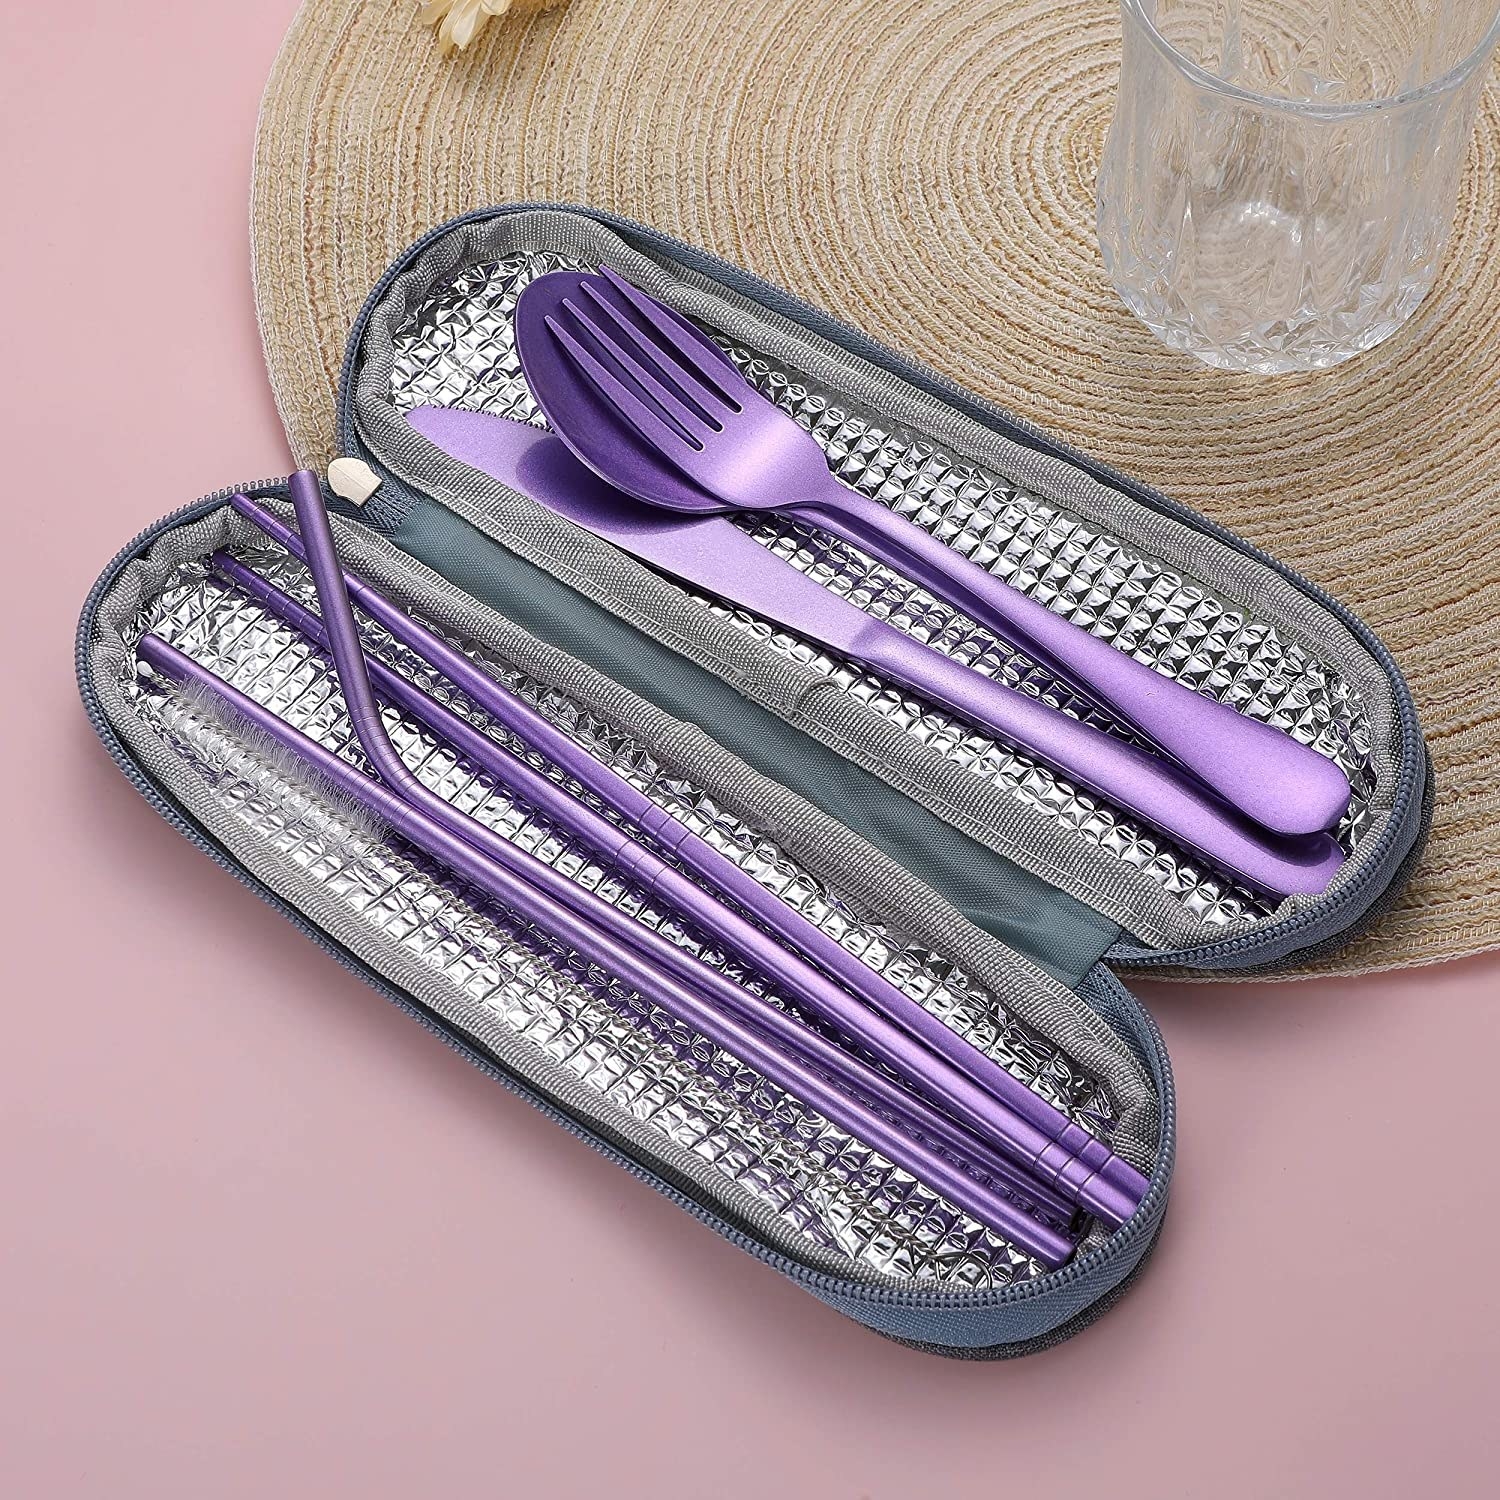 The cutlery inside the travel case